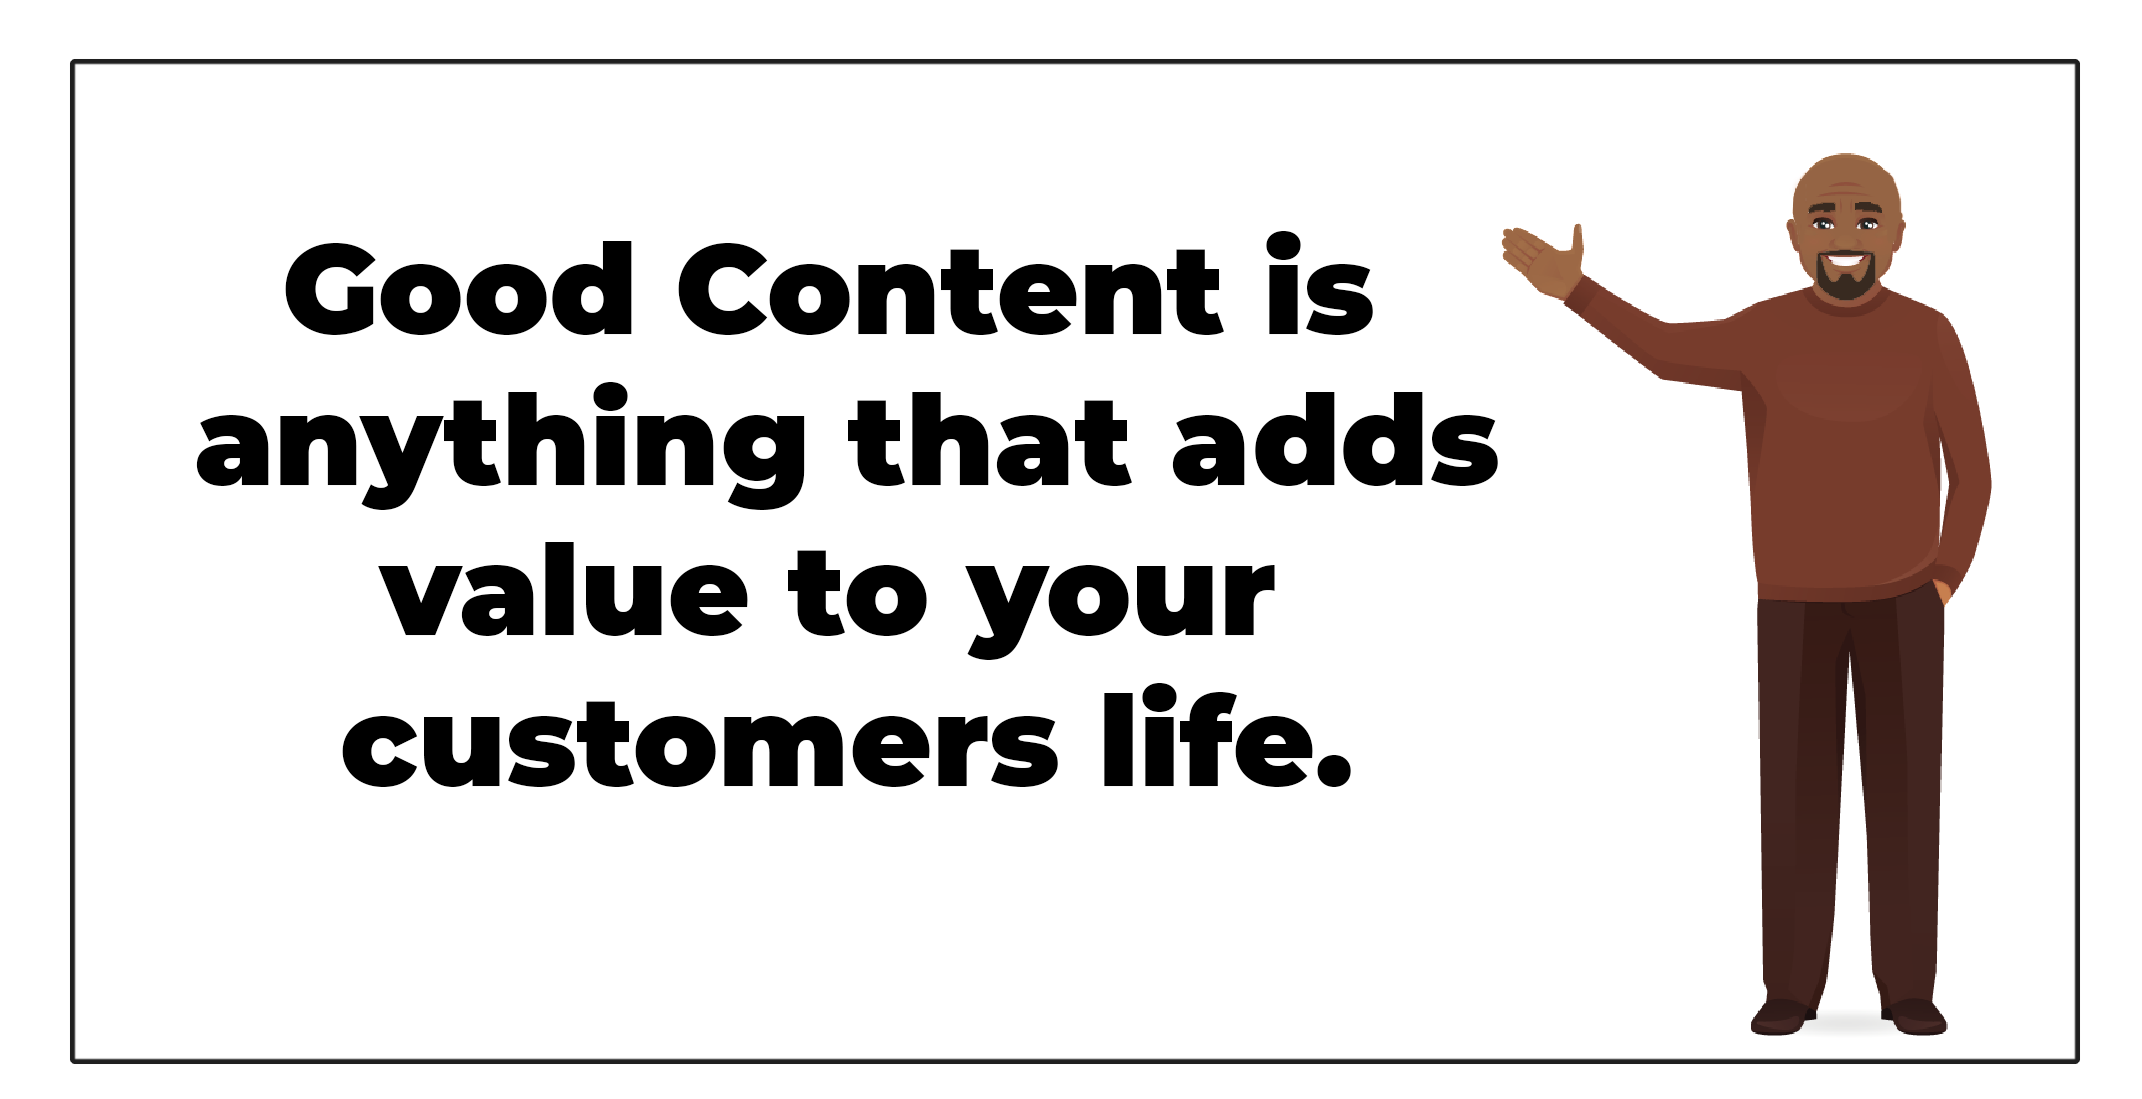 How to Create Quality Content to Attract More Leads